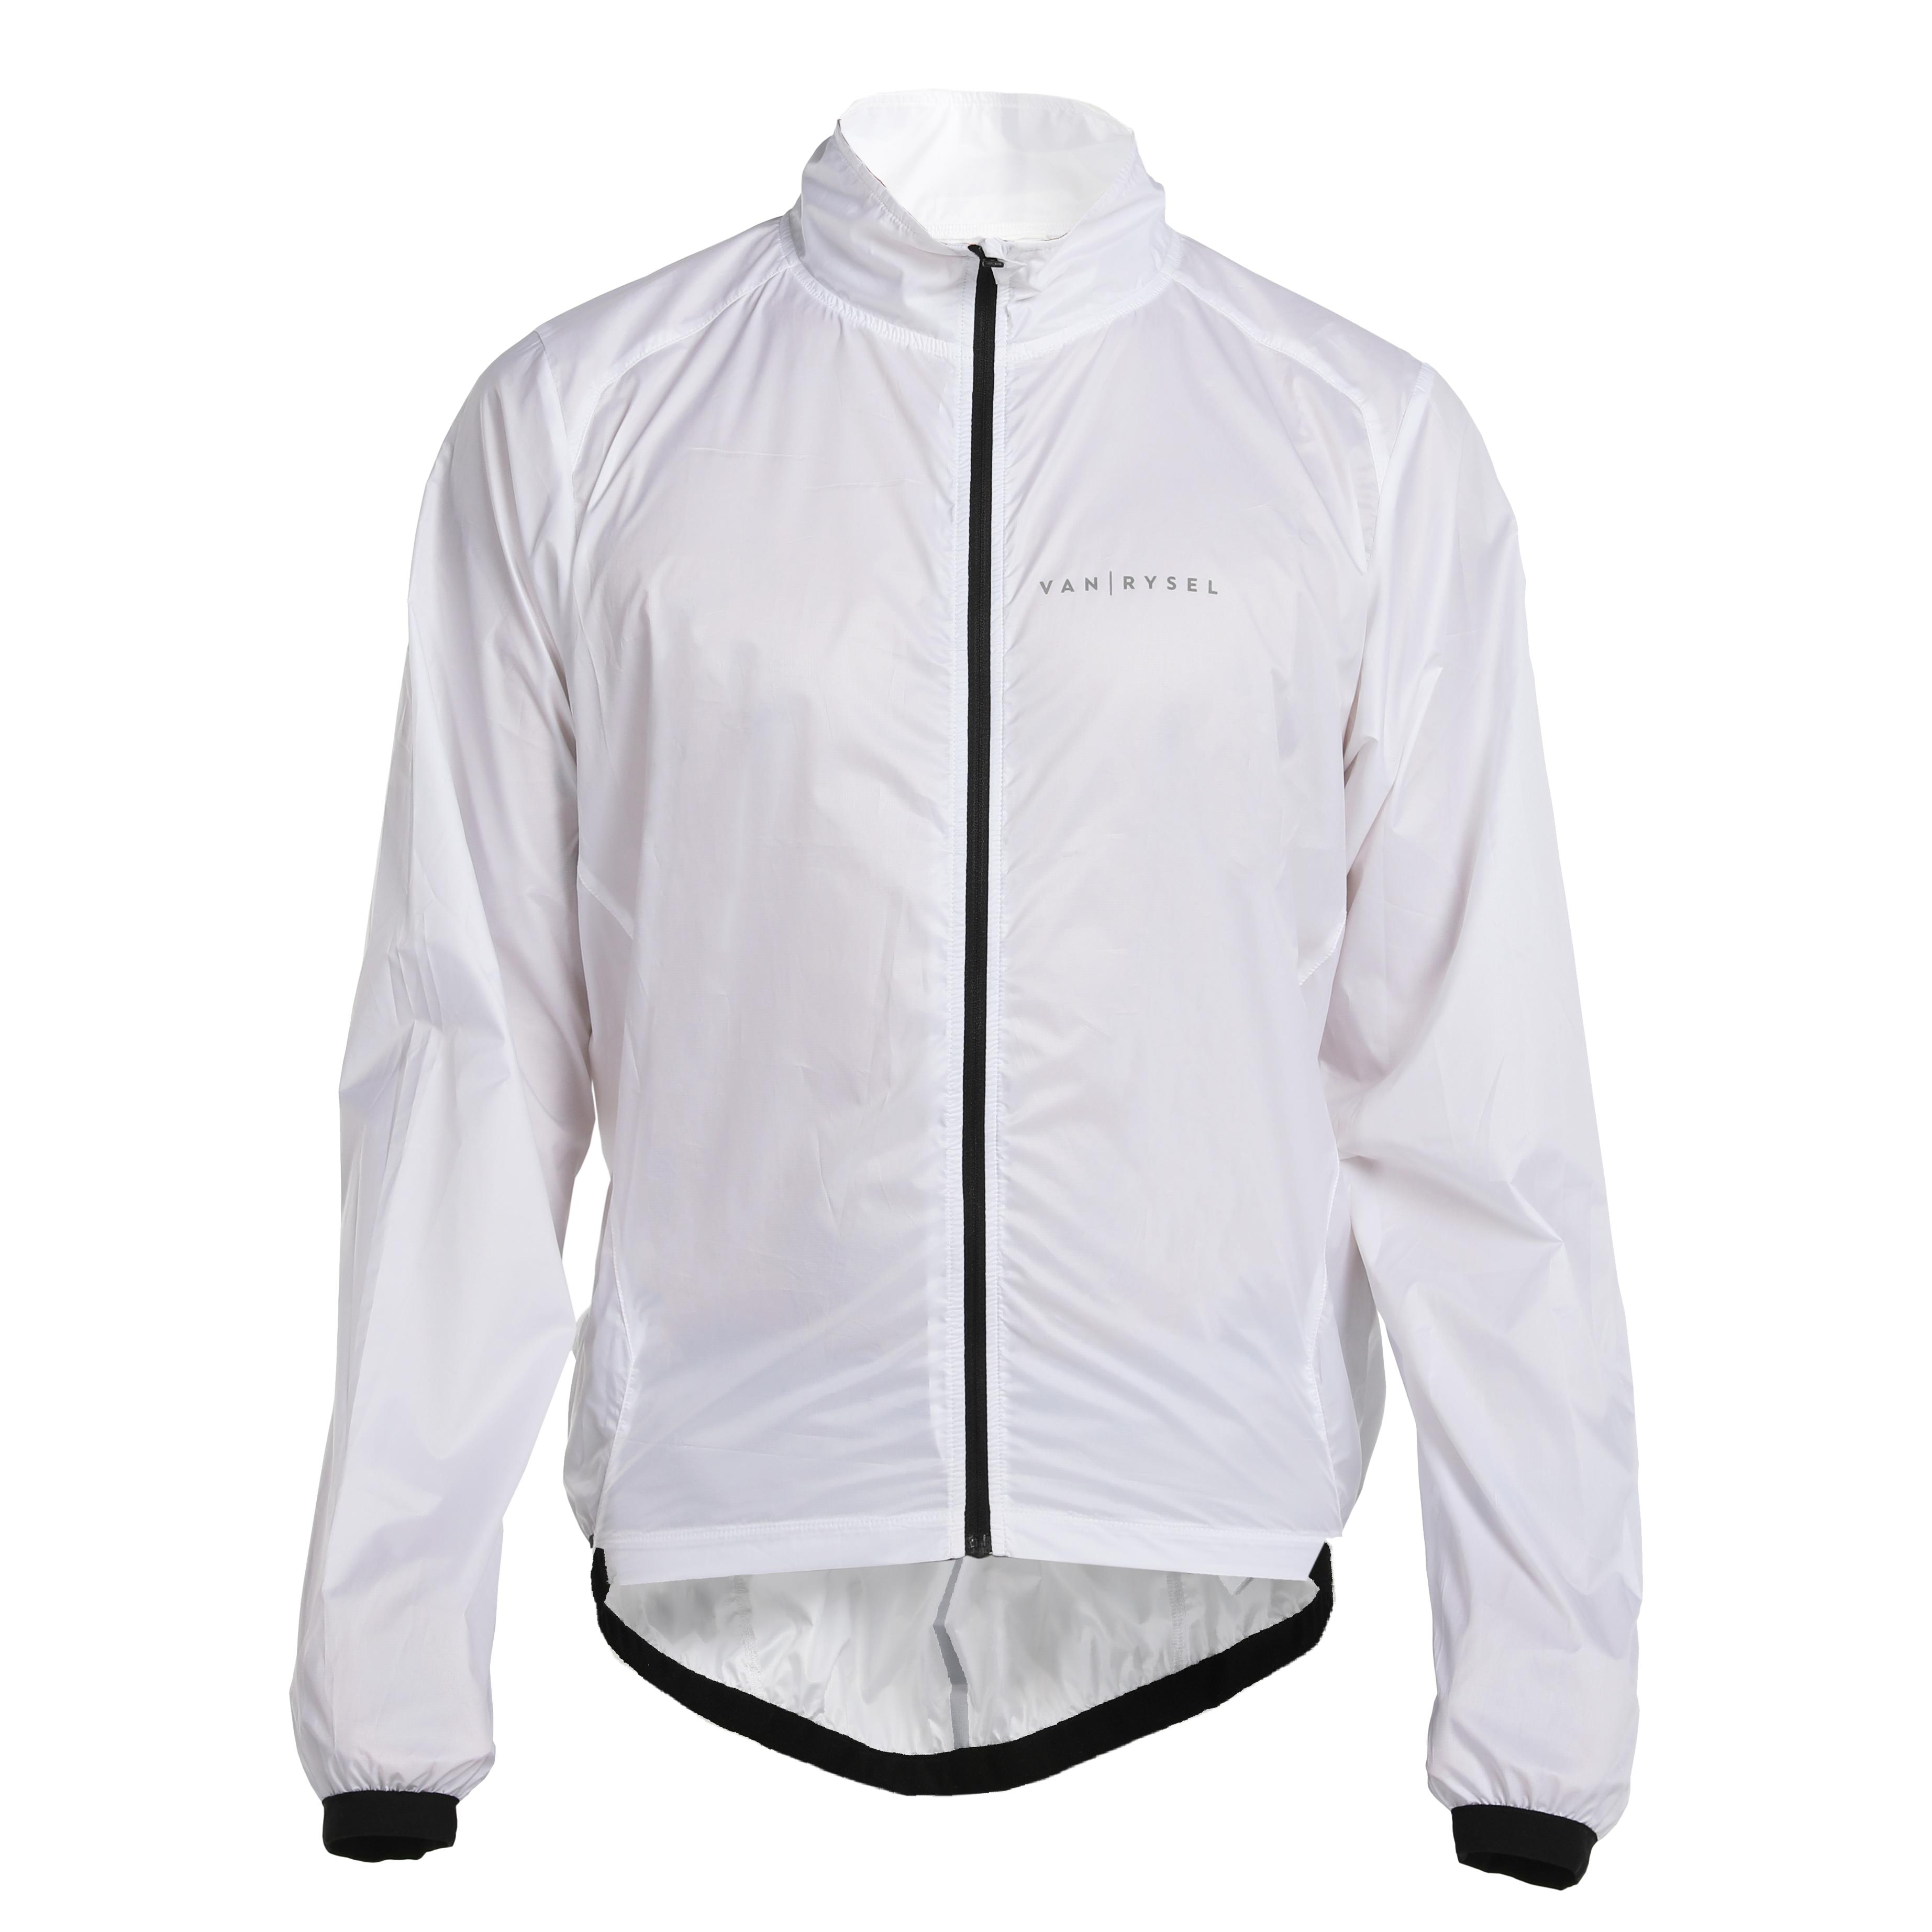 QUECHUA by Decathlon Full Sleeve Solid Men Jacket - Buy QUECHUA by Decathlon  Full Sleeve Solid Men Jacket Online at Best Prices in India | Flipkart.com